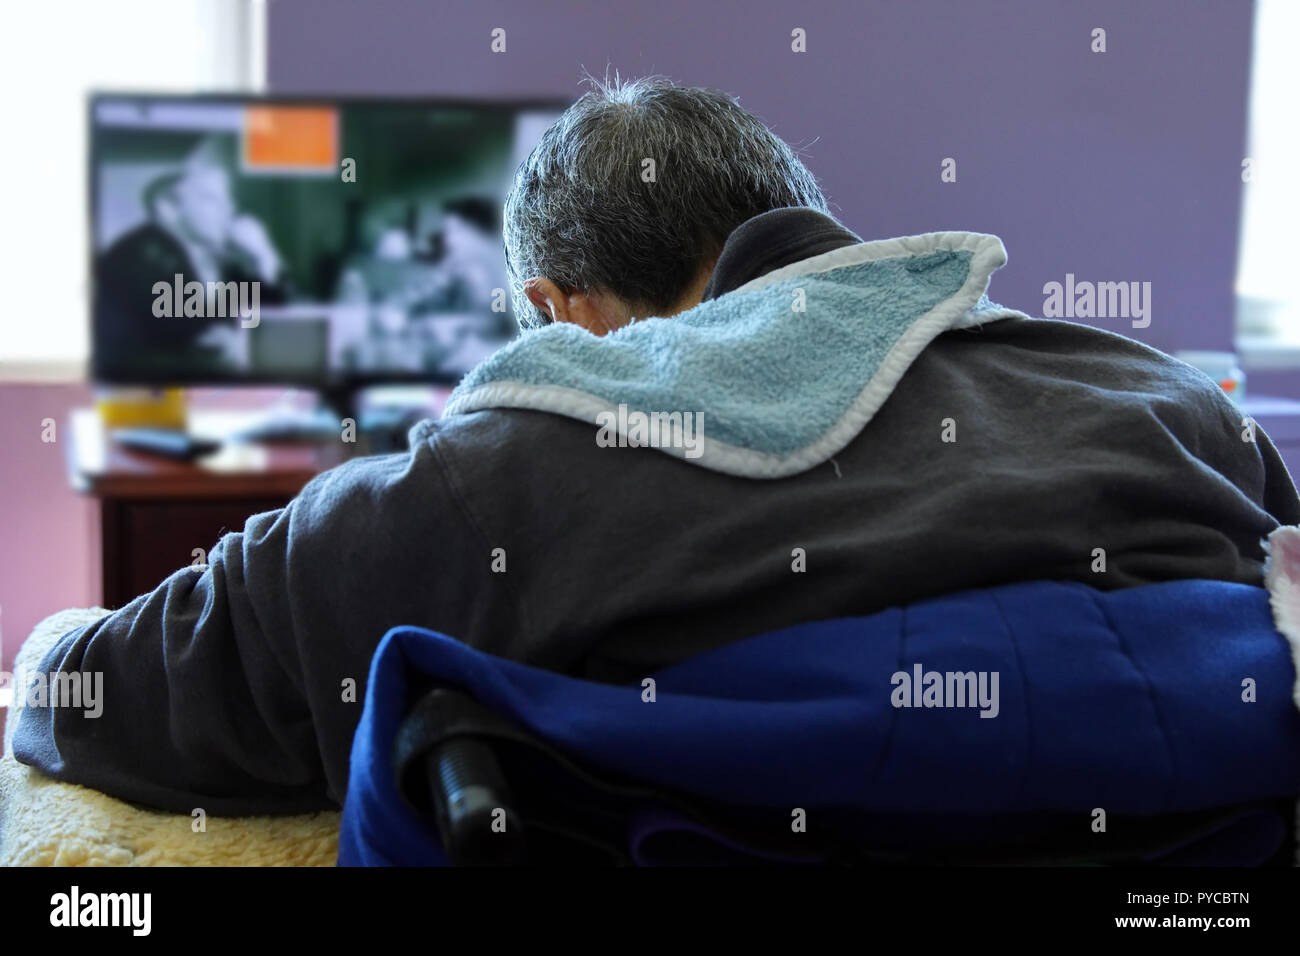 New York, NY USA. Jun 2016. Elderly man asleep in front of the TV at a nursing home. Stock Photo